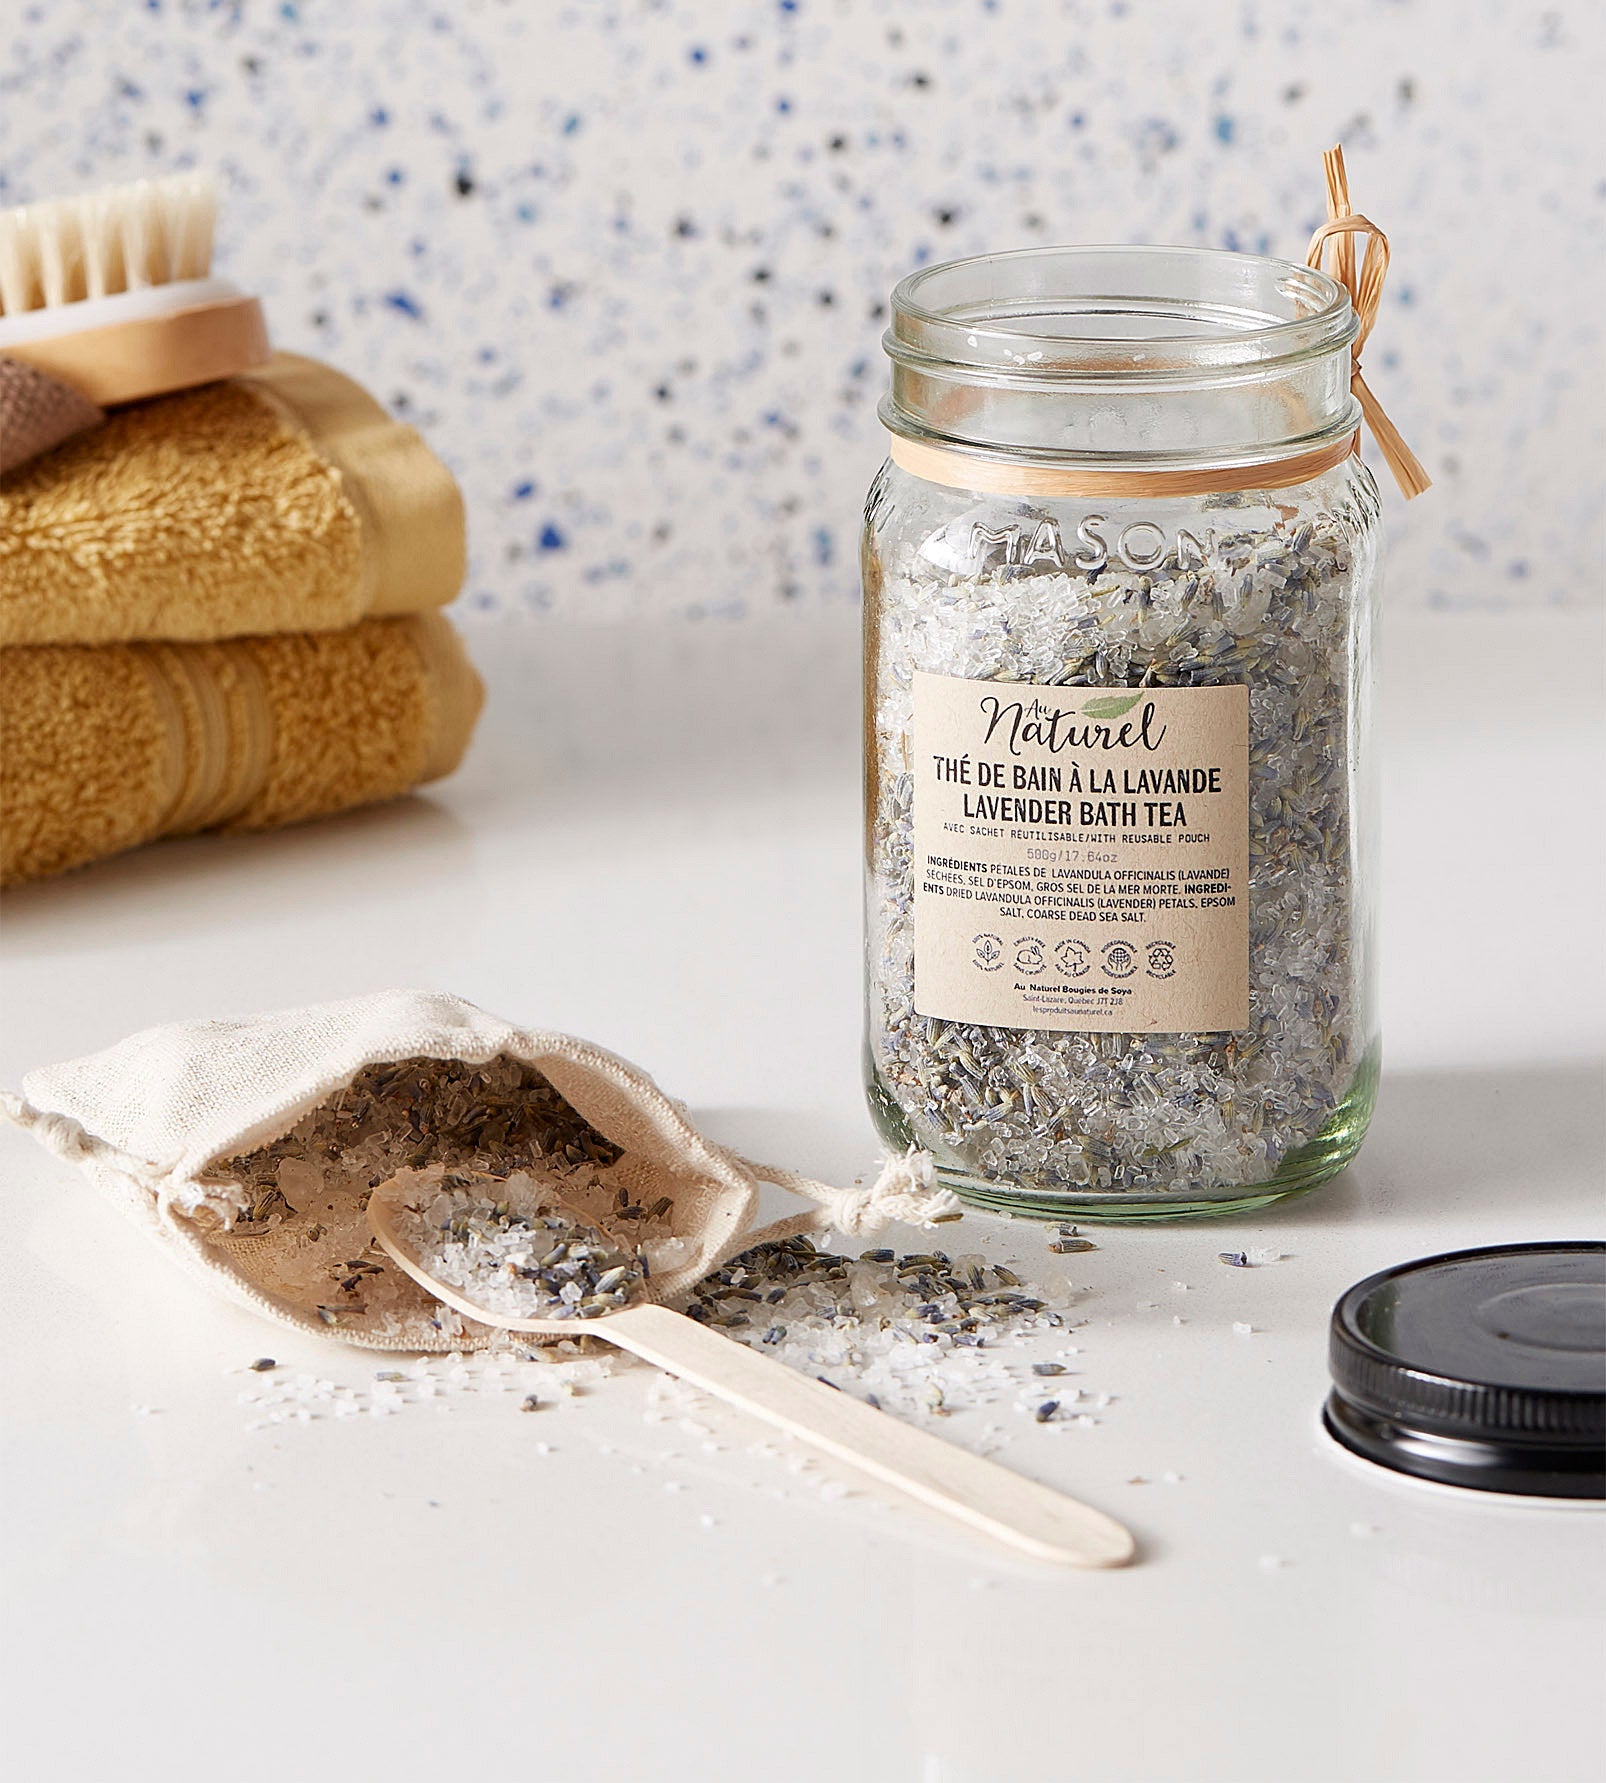 A large jar filled with bath salts There is a small wooden spoon next to the jar